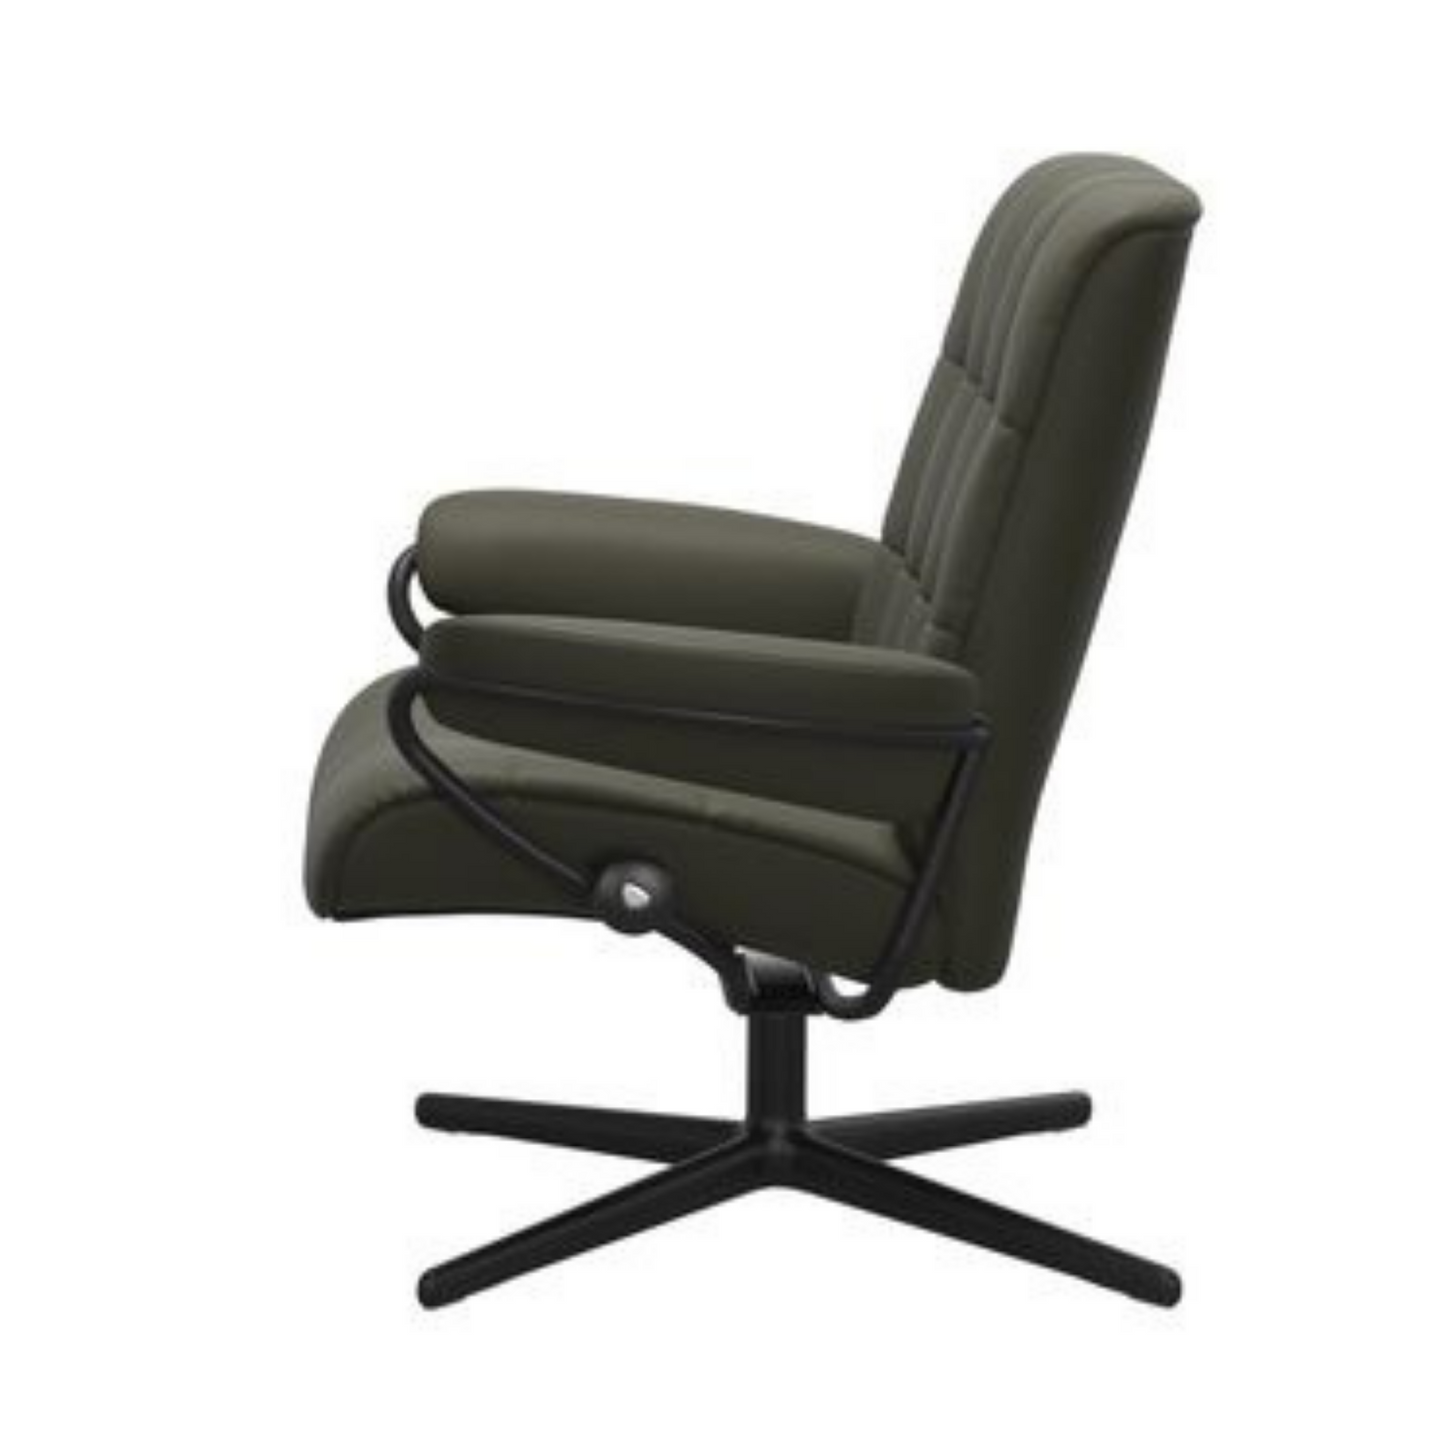 London Low Back Recliner by Stressless